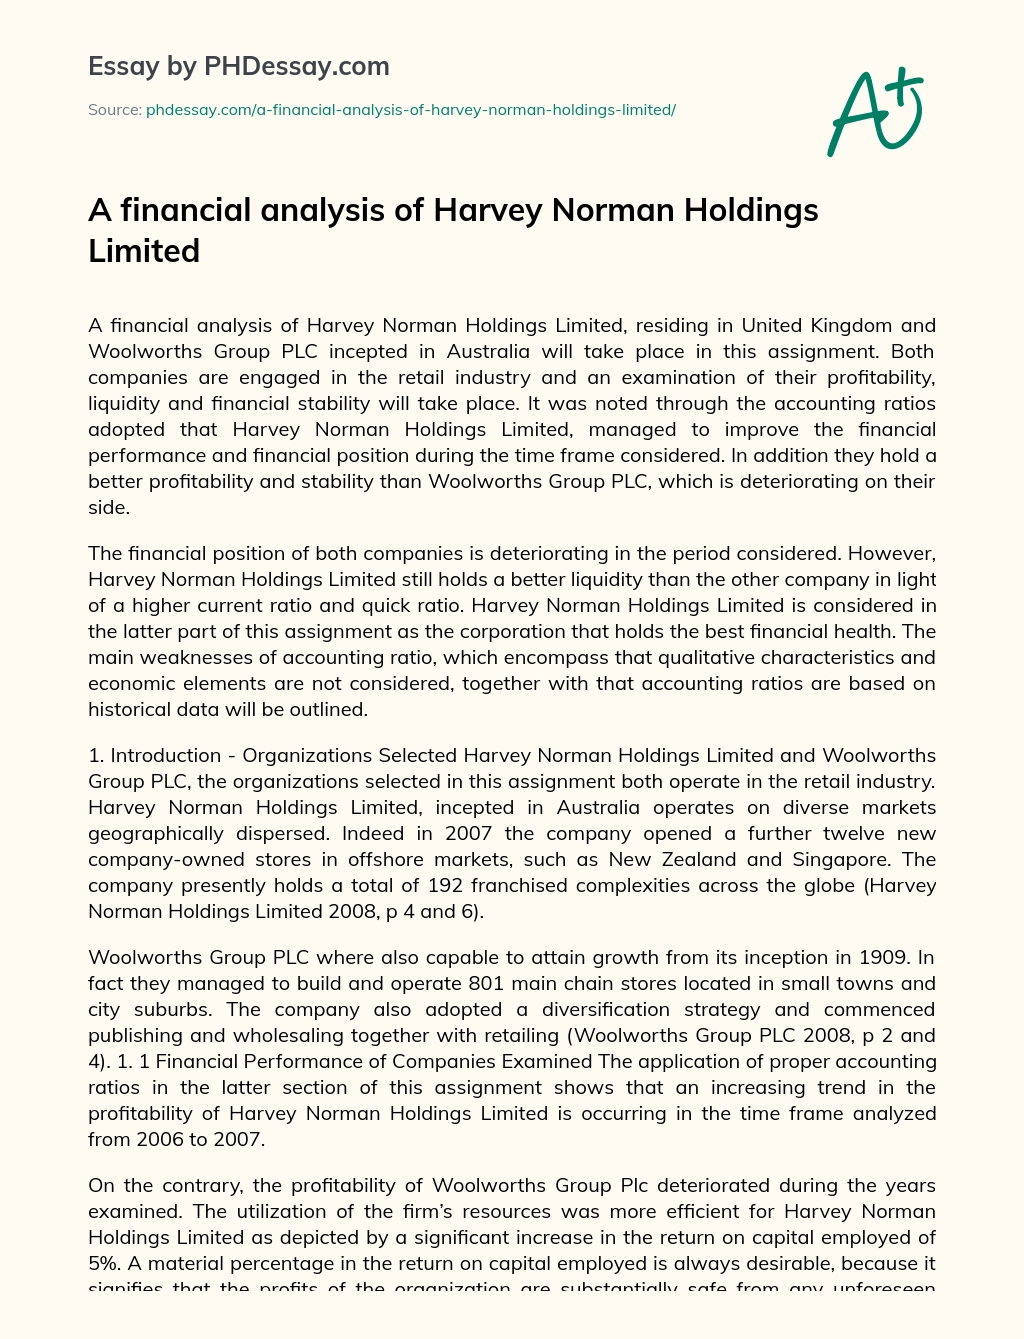 A financial analysis of Harvey Norman Holdings Limited essay